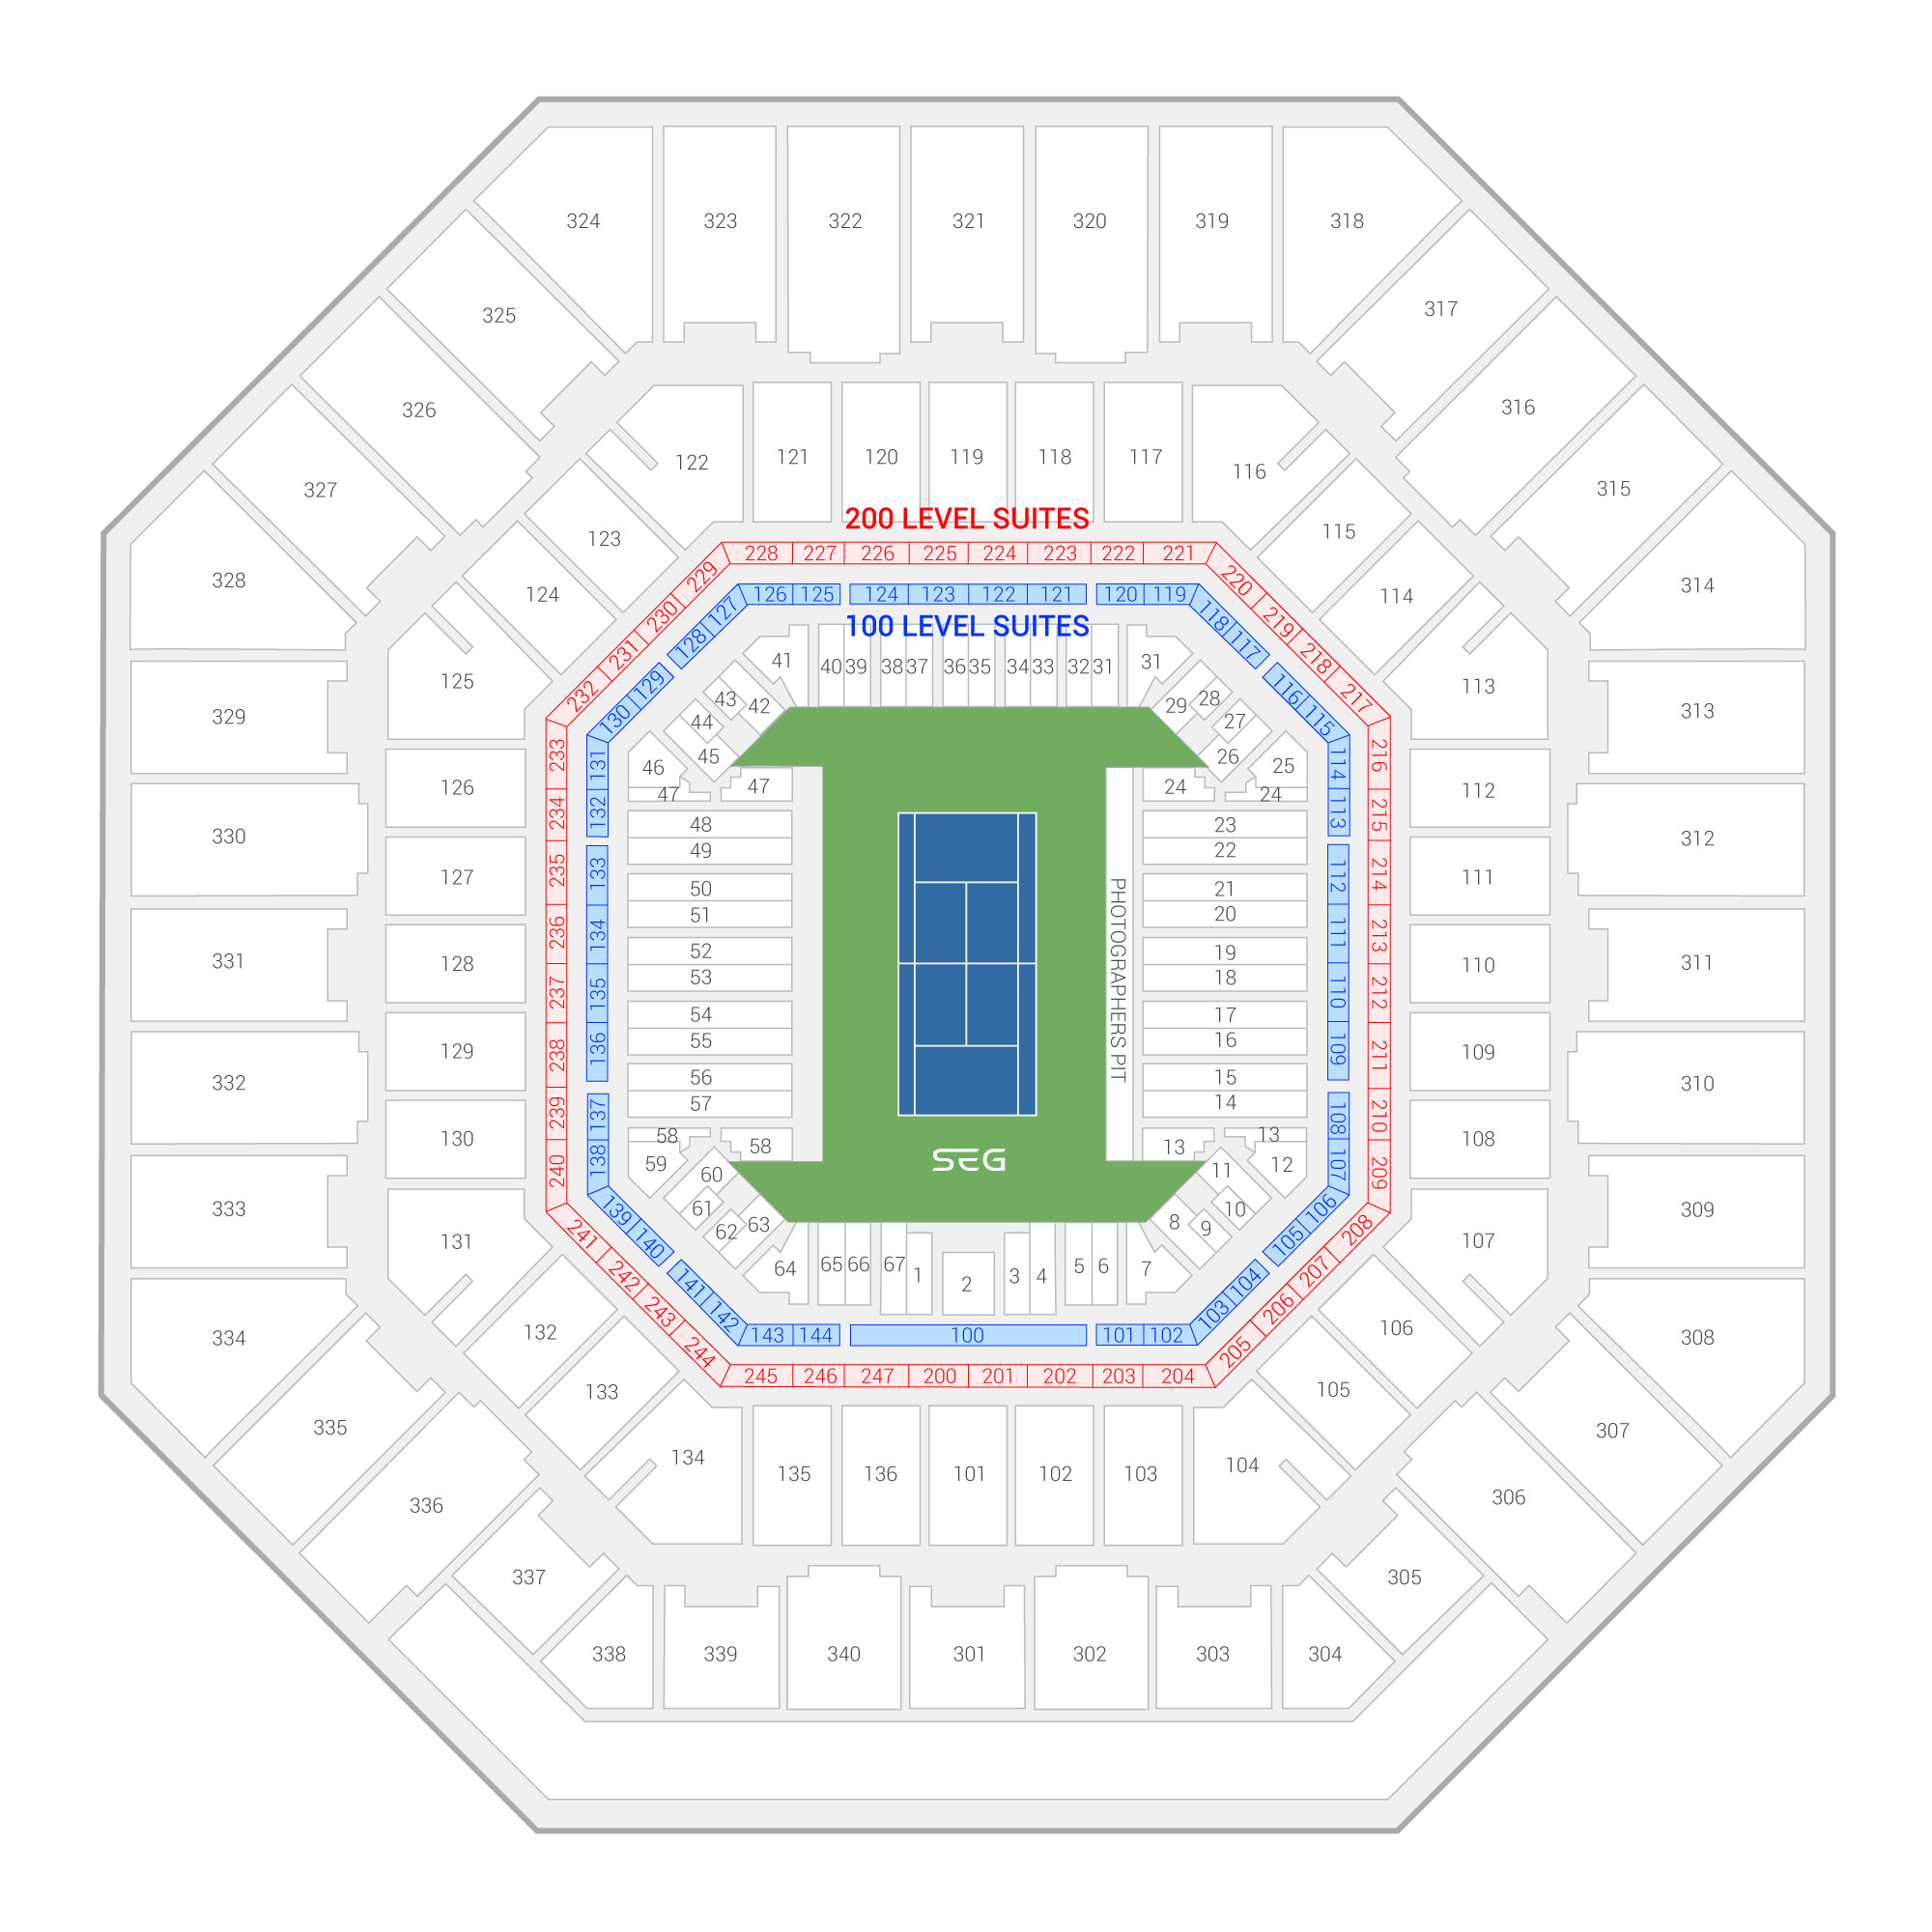 Arthur Ashe Stadium / US Open Tennis Championship Suite Map and Seating Chart